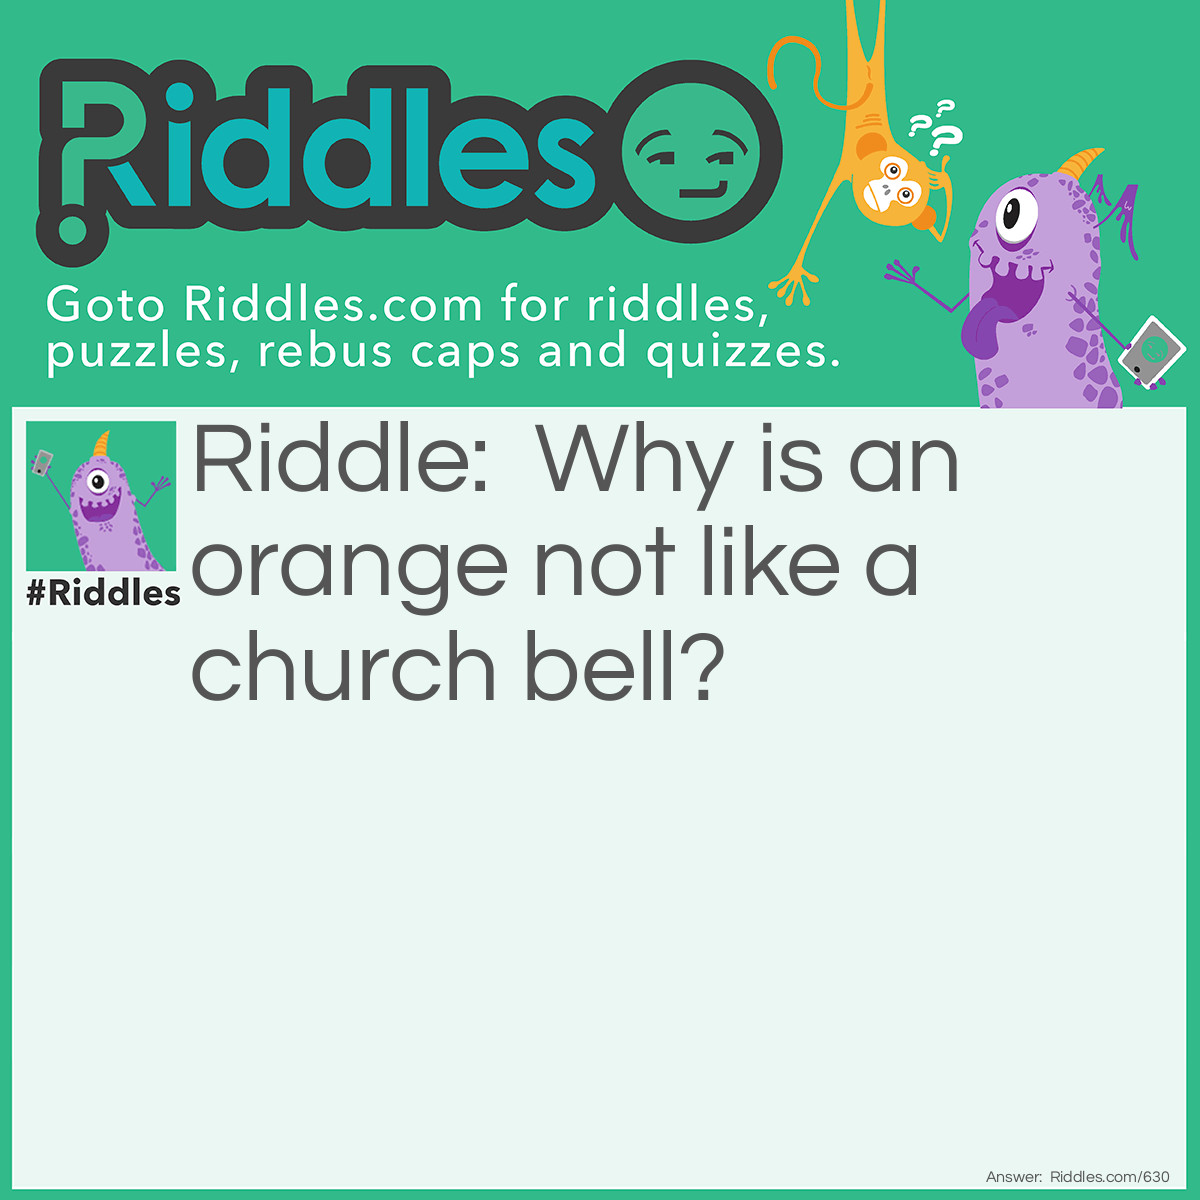 Riddle: Why is an orange not like a church bell? Answer: Because it is never peeled (pealed) but once.